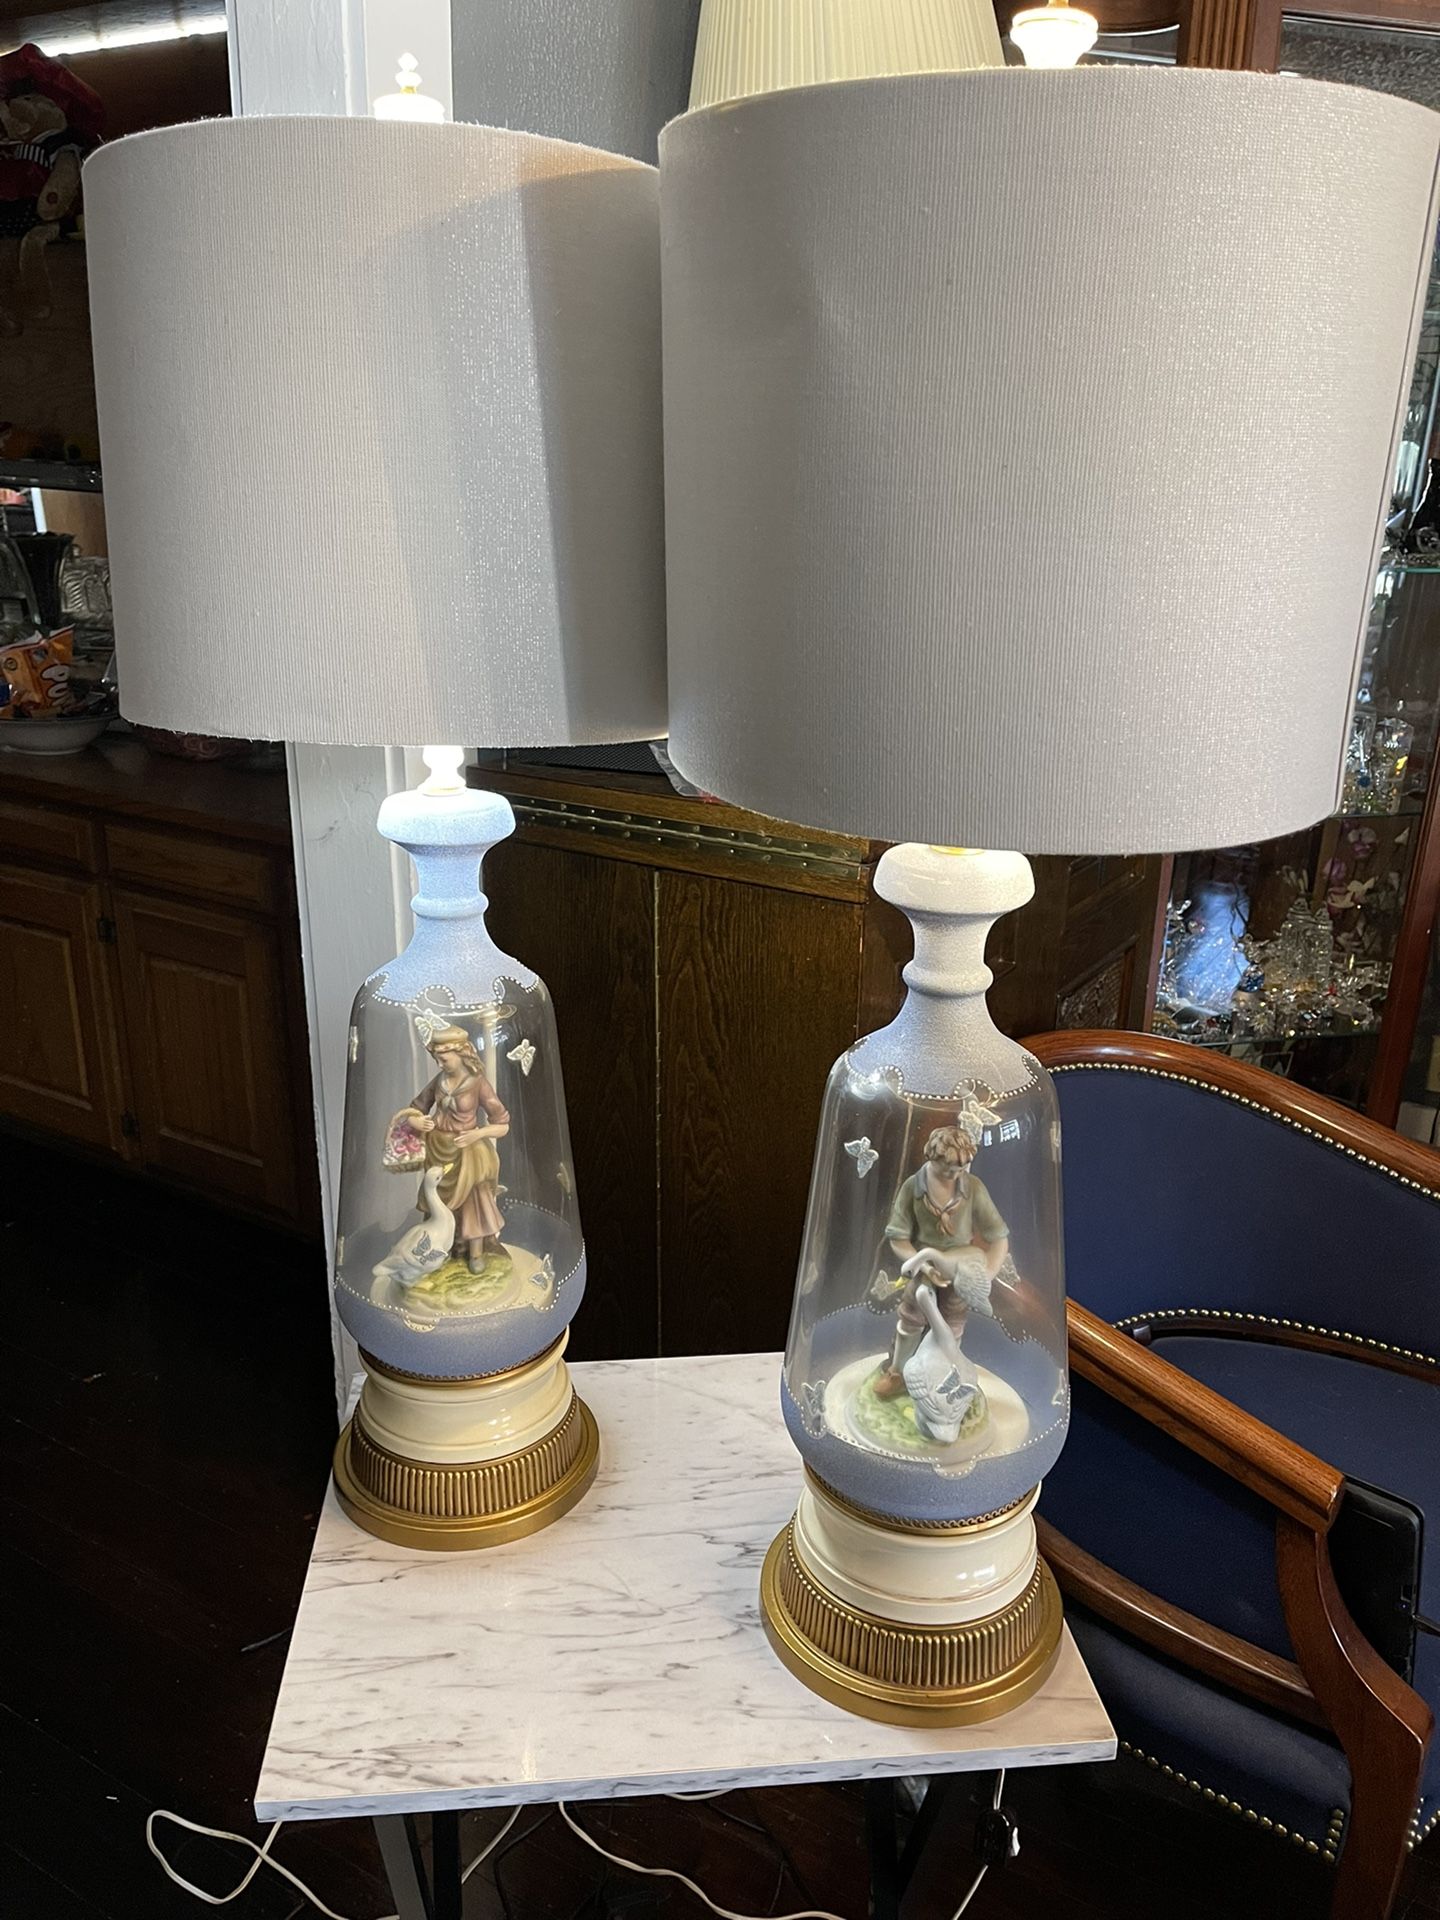 Vintage Story Book Lamps